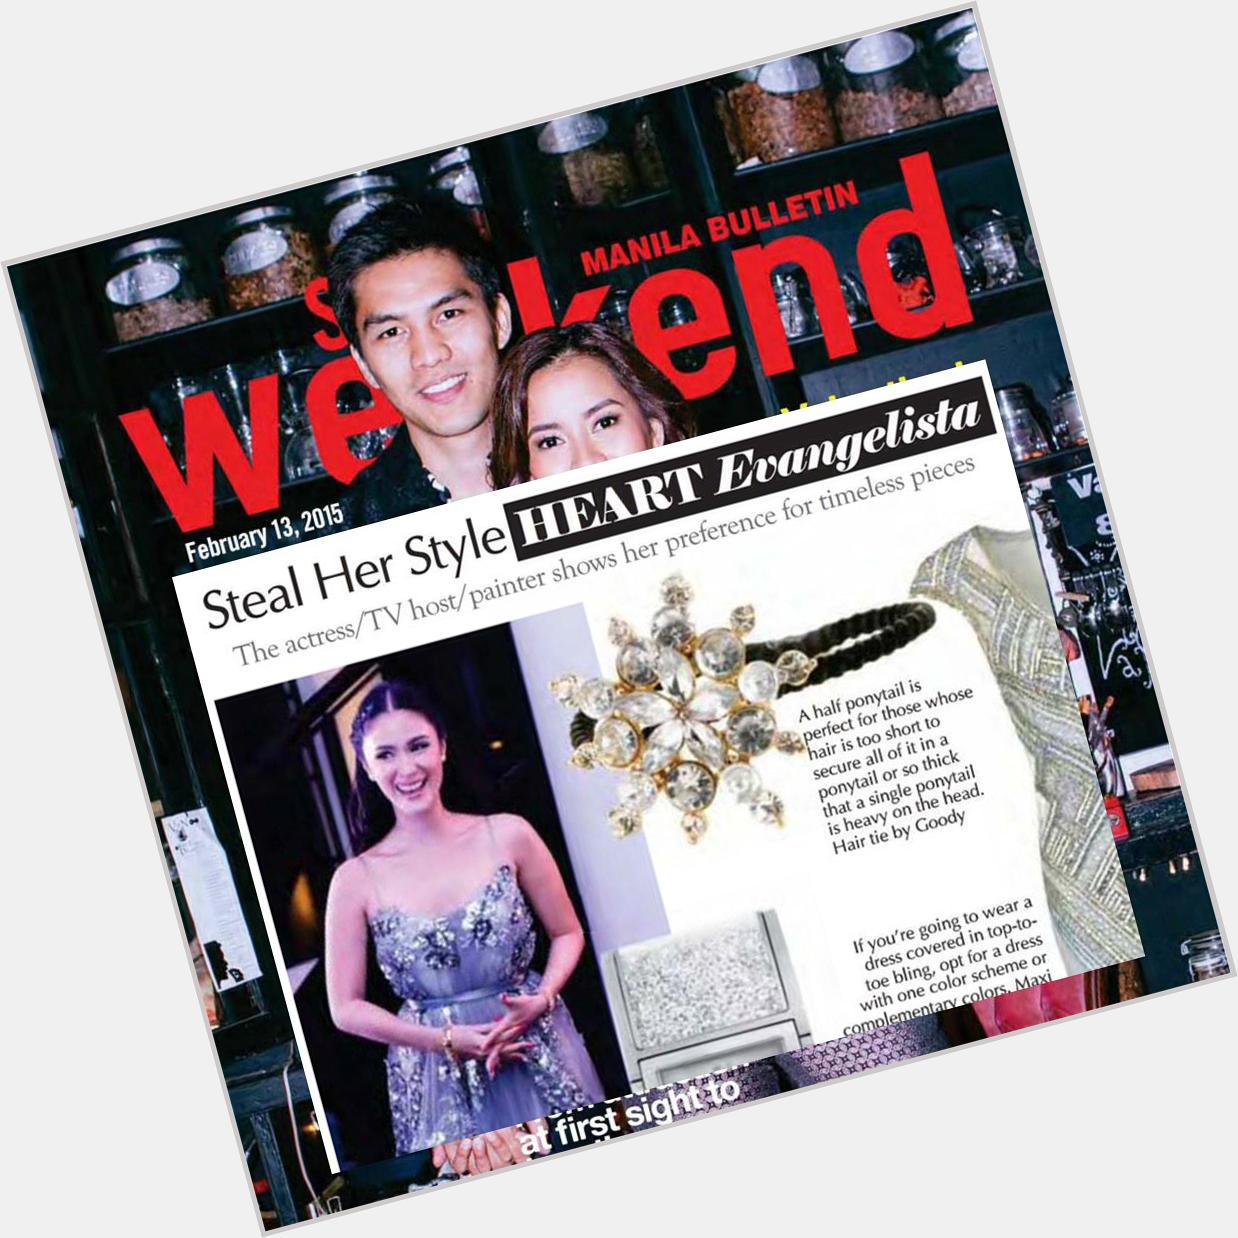 Steal the style of bday girl Heart Evangelista with our Luxe ponytailer, as seen in Style Weekend. Happy Vday!  